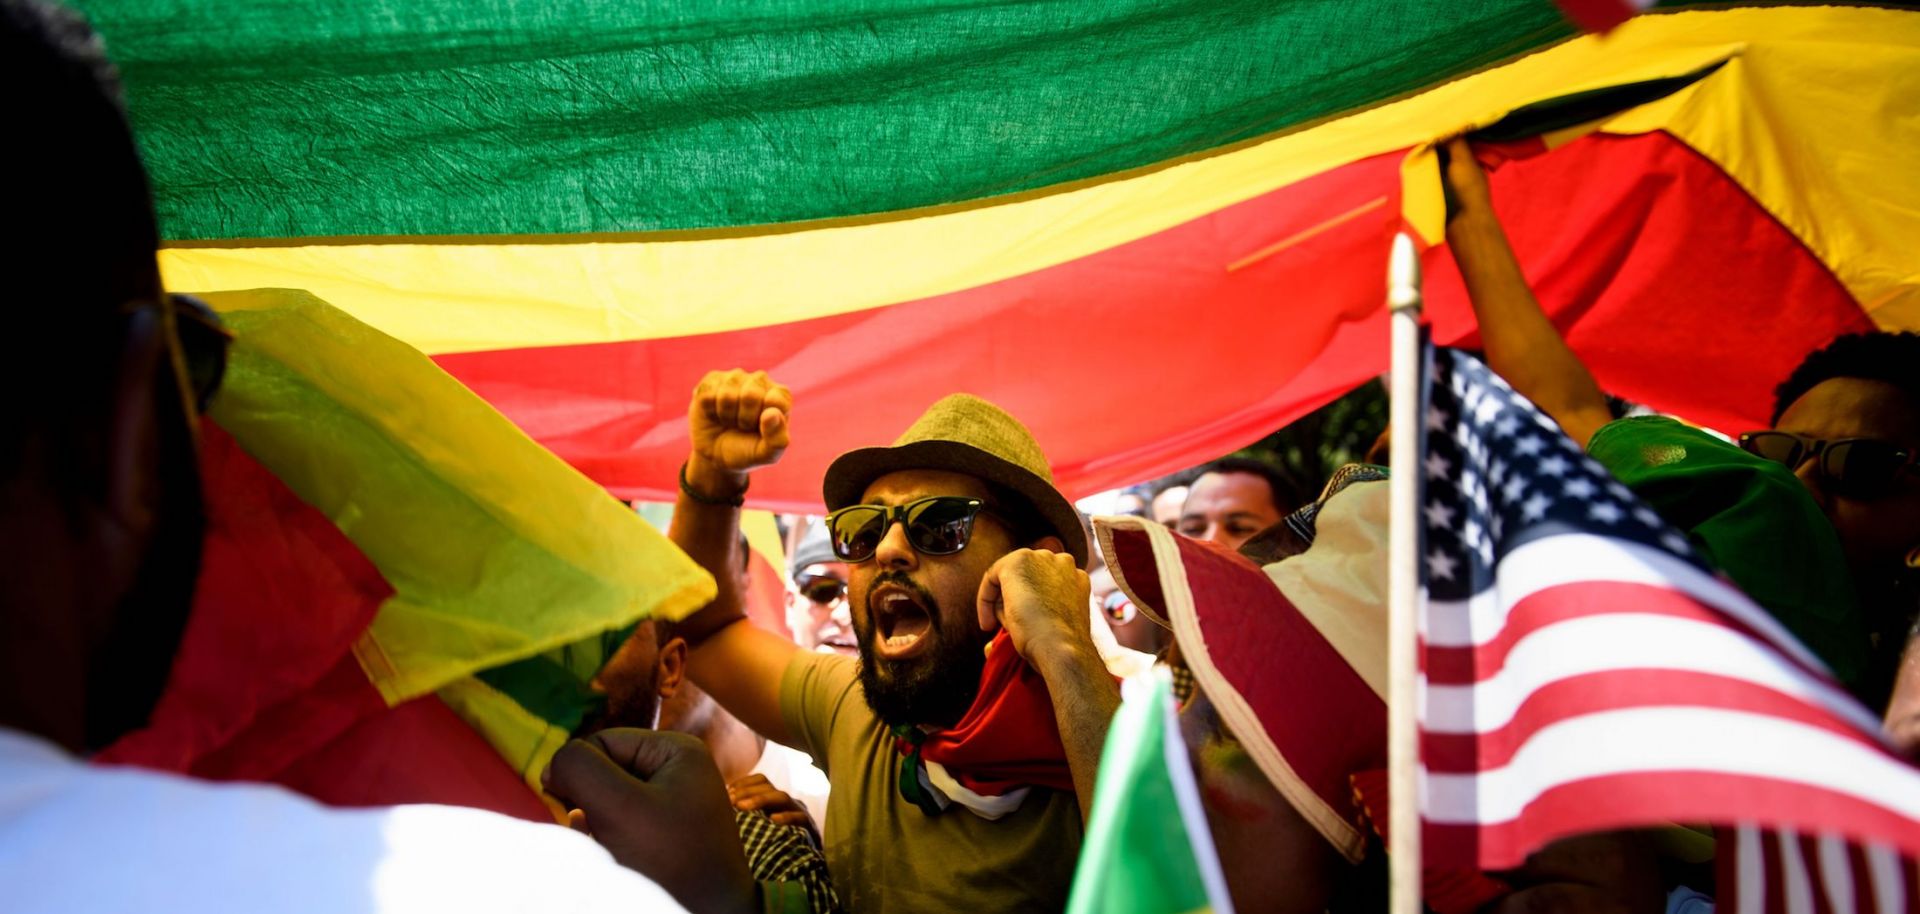 Supporters of Ethiopia's Prime Minister at rally in Washington